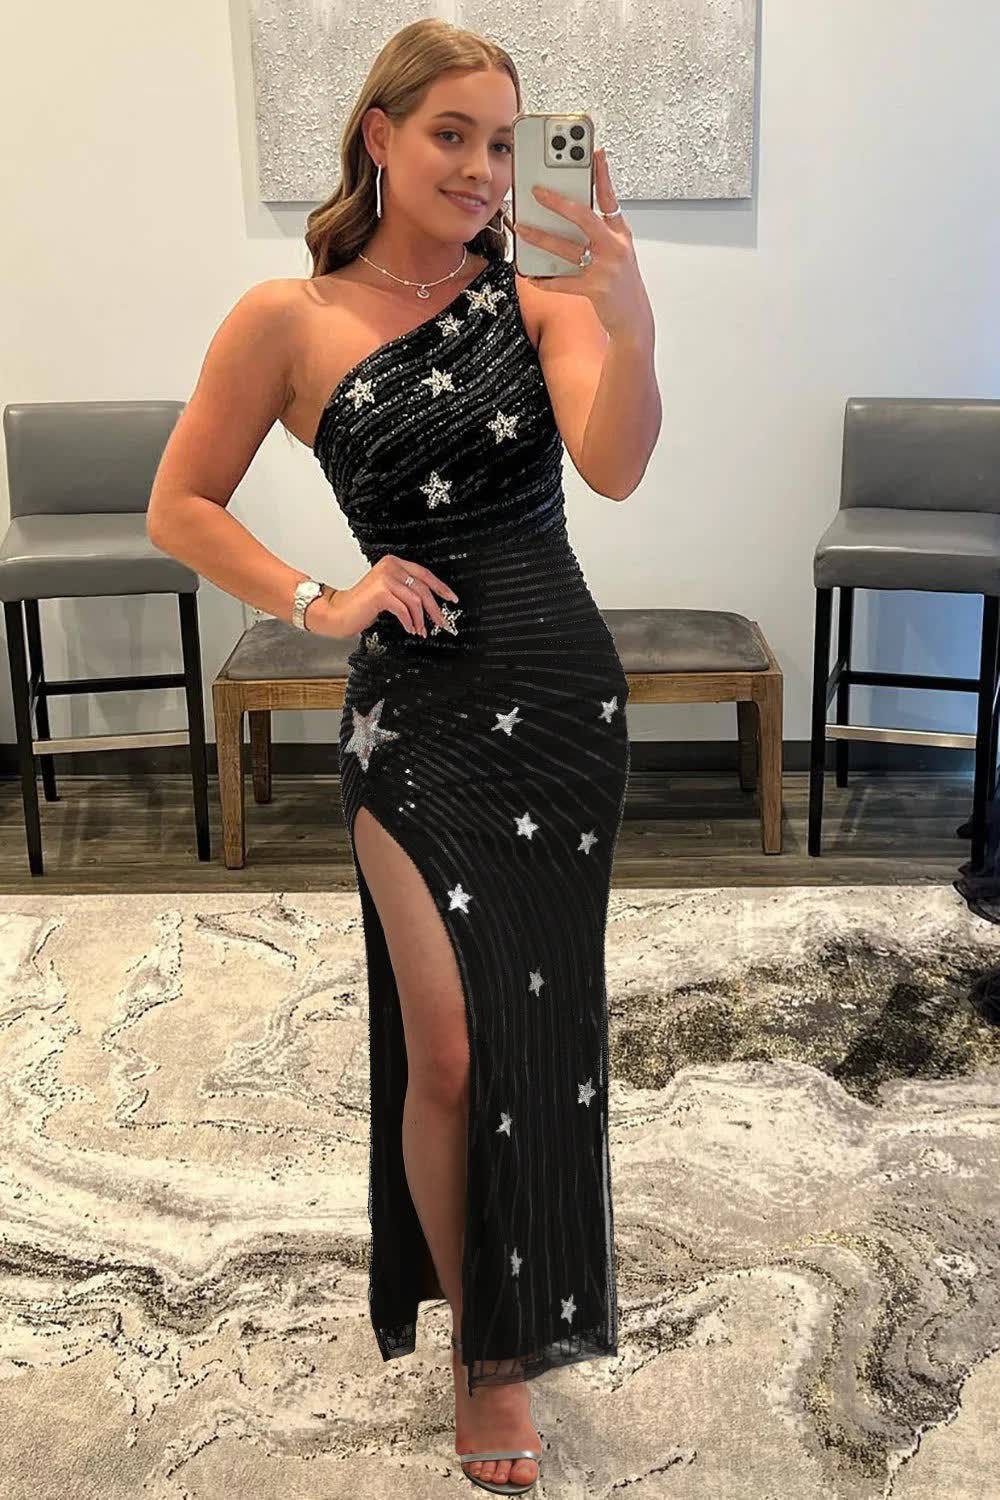 Sparkly Sequins Black One Shoulder Long Corset Prom Dress with Stars outfit, Sparkly Sequins Black One Shoulder Long Prom Dress with Stars